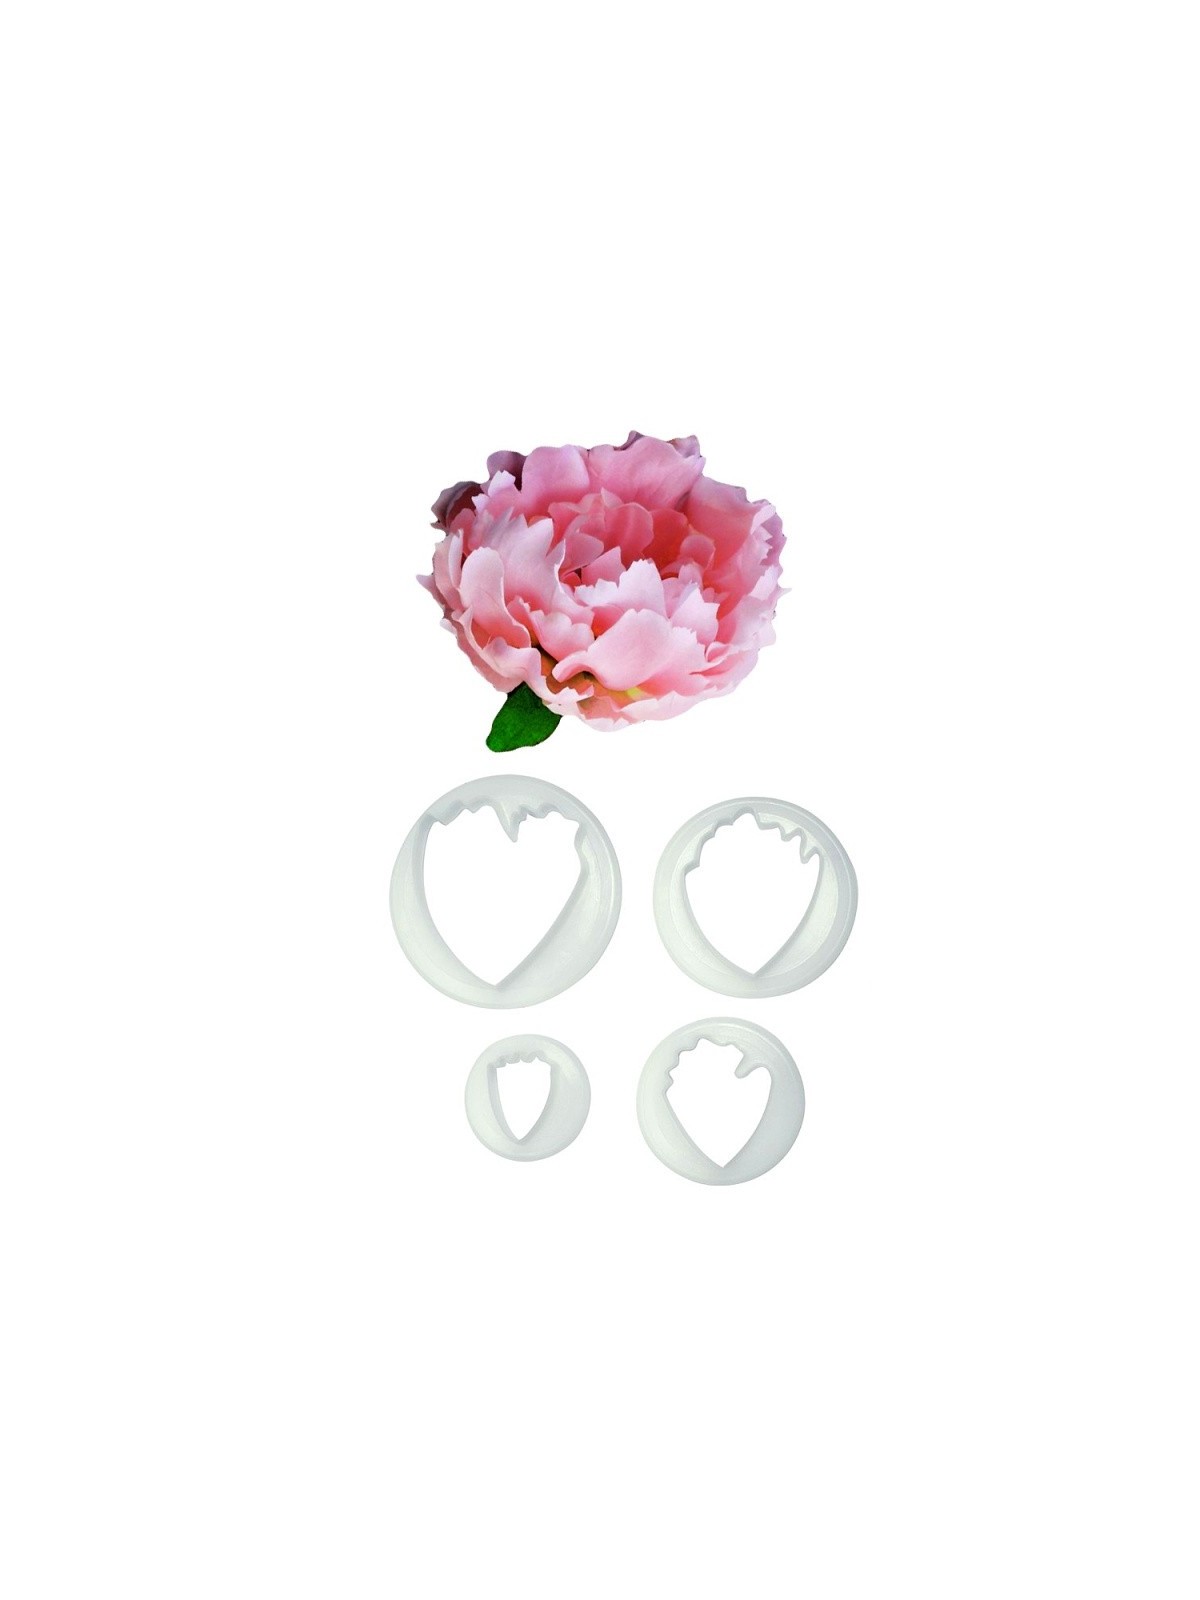 Cutters - Peony - 4 pieces